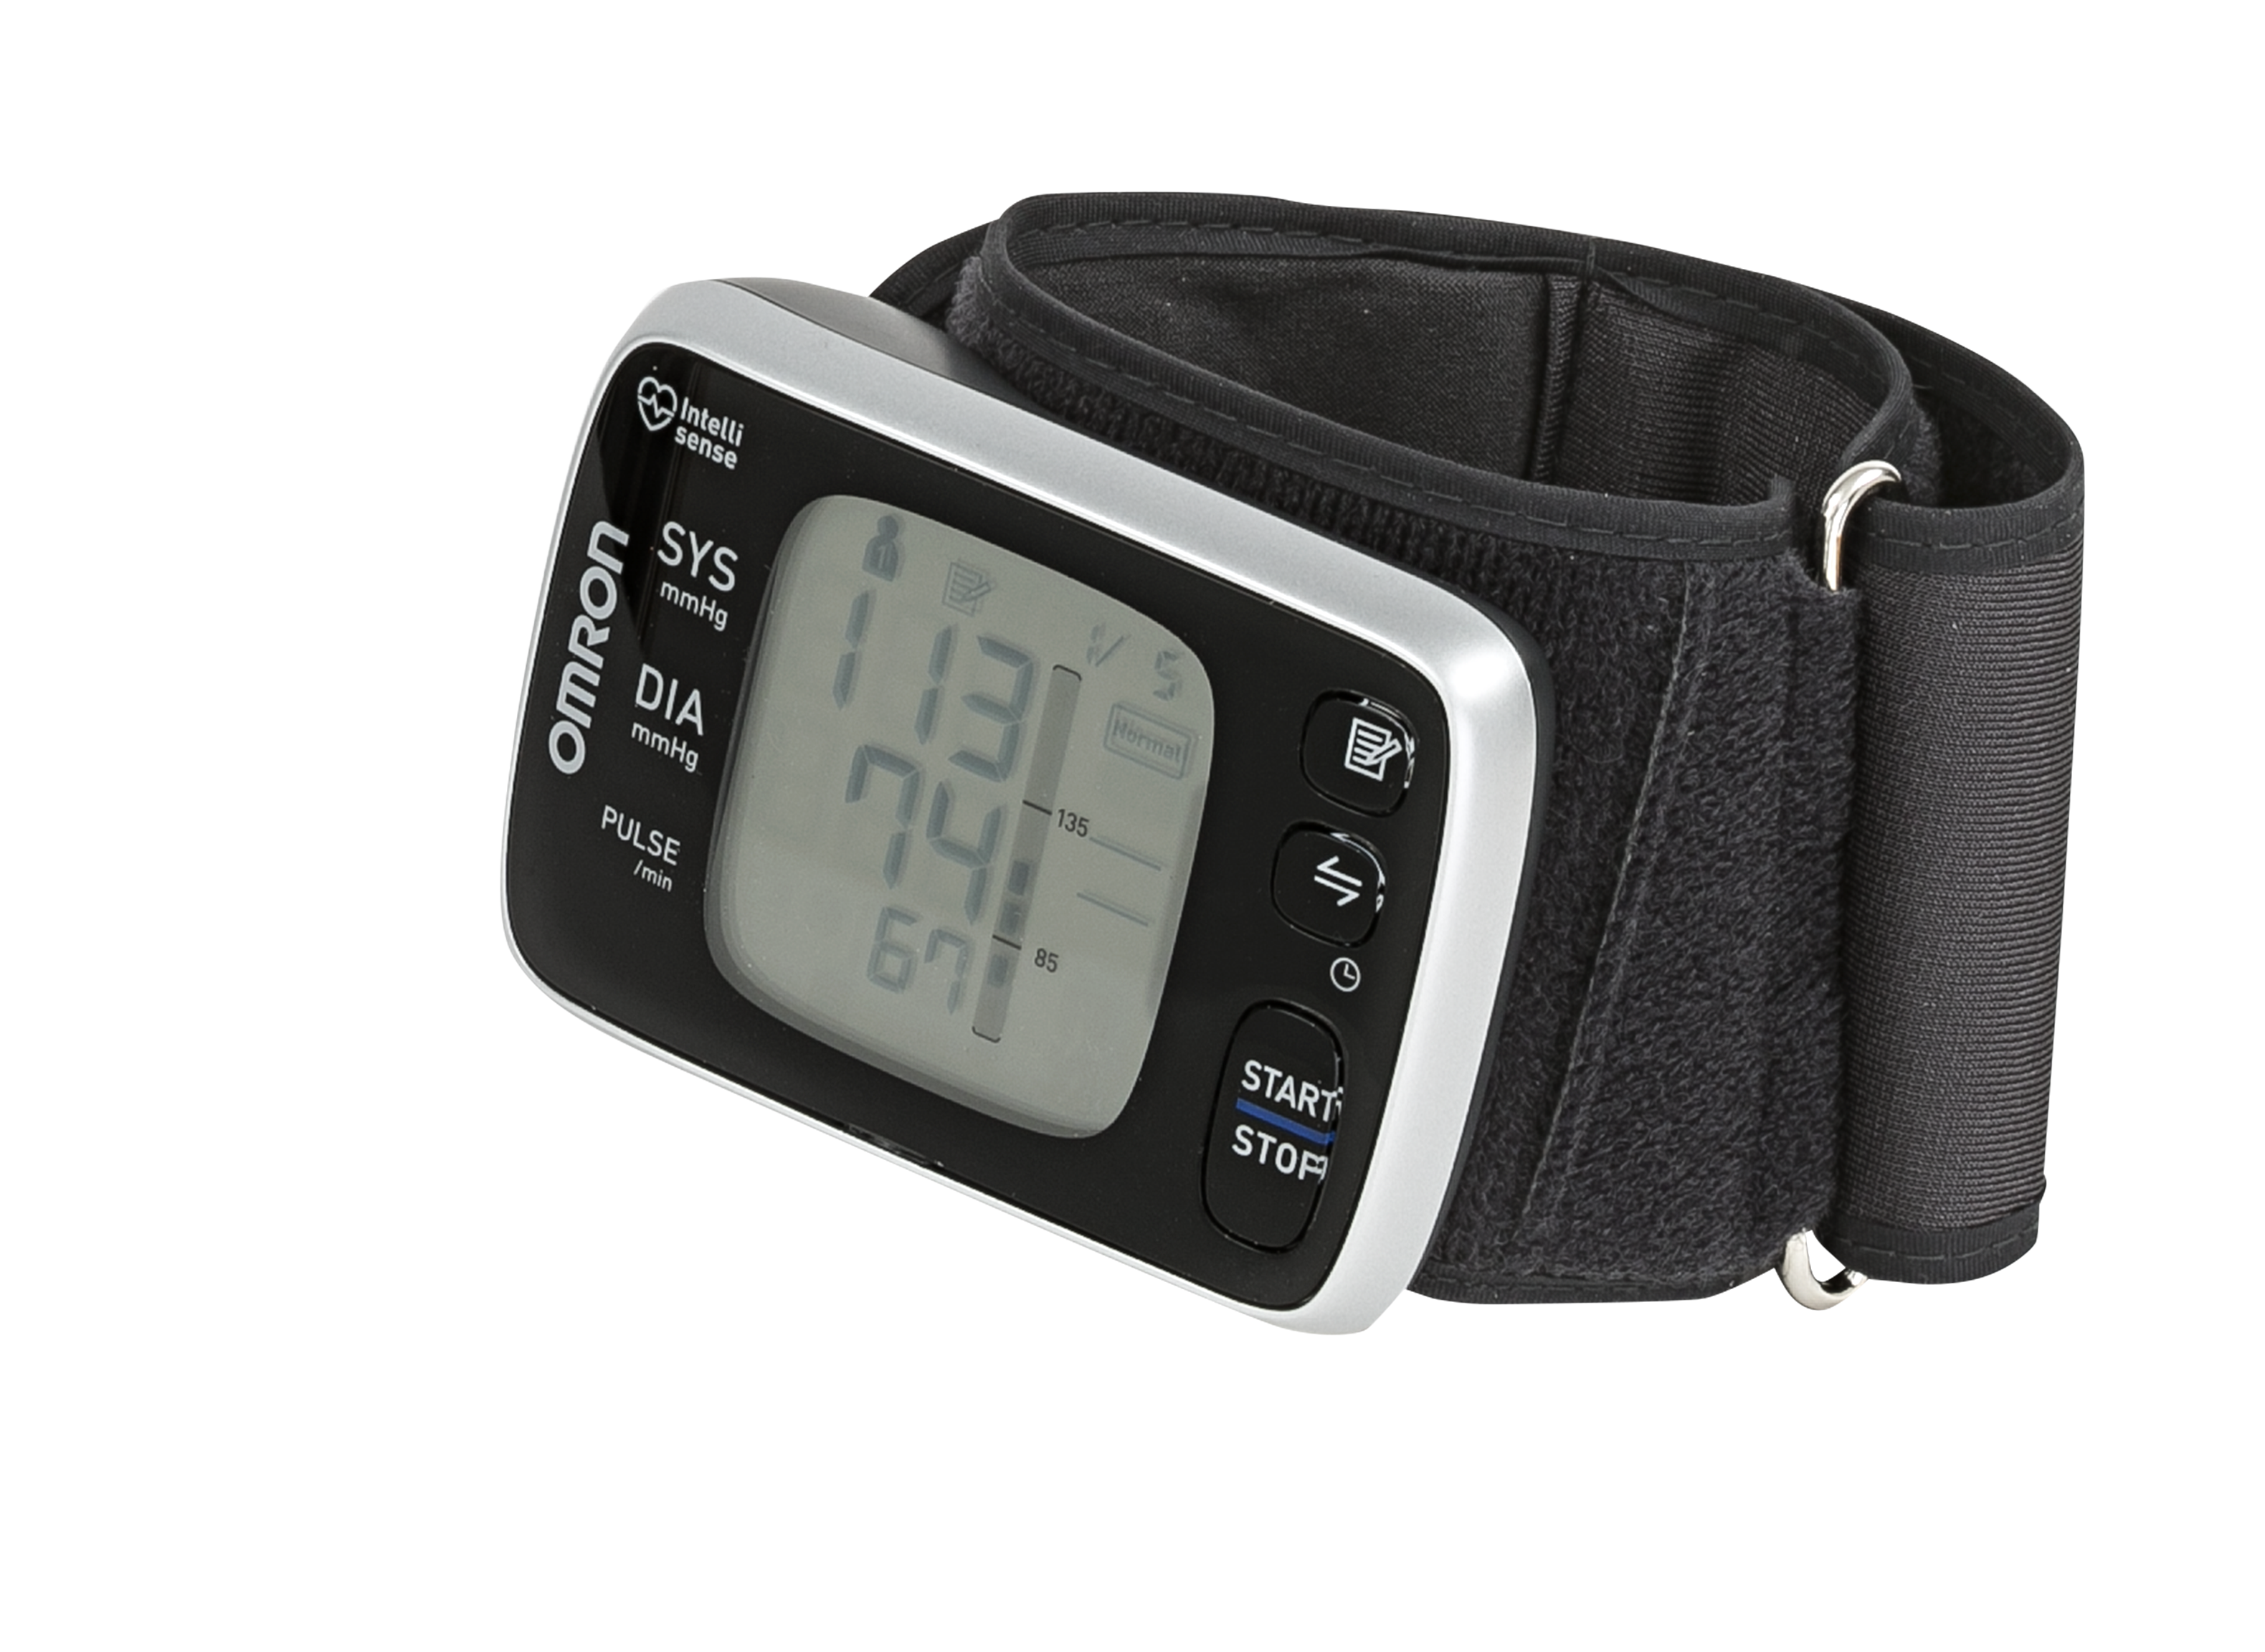 https://crdms.images.consumerreports.org/prod/products/cr/models/384741-bloodpressuremonitors-omron-bp65310series.png